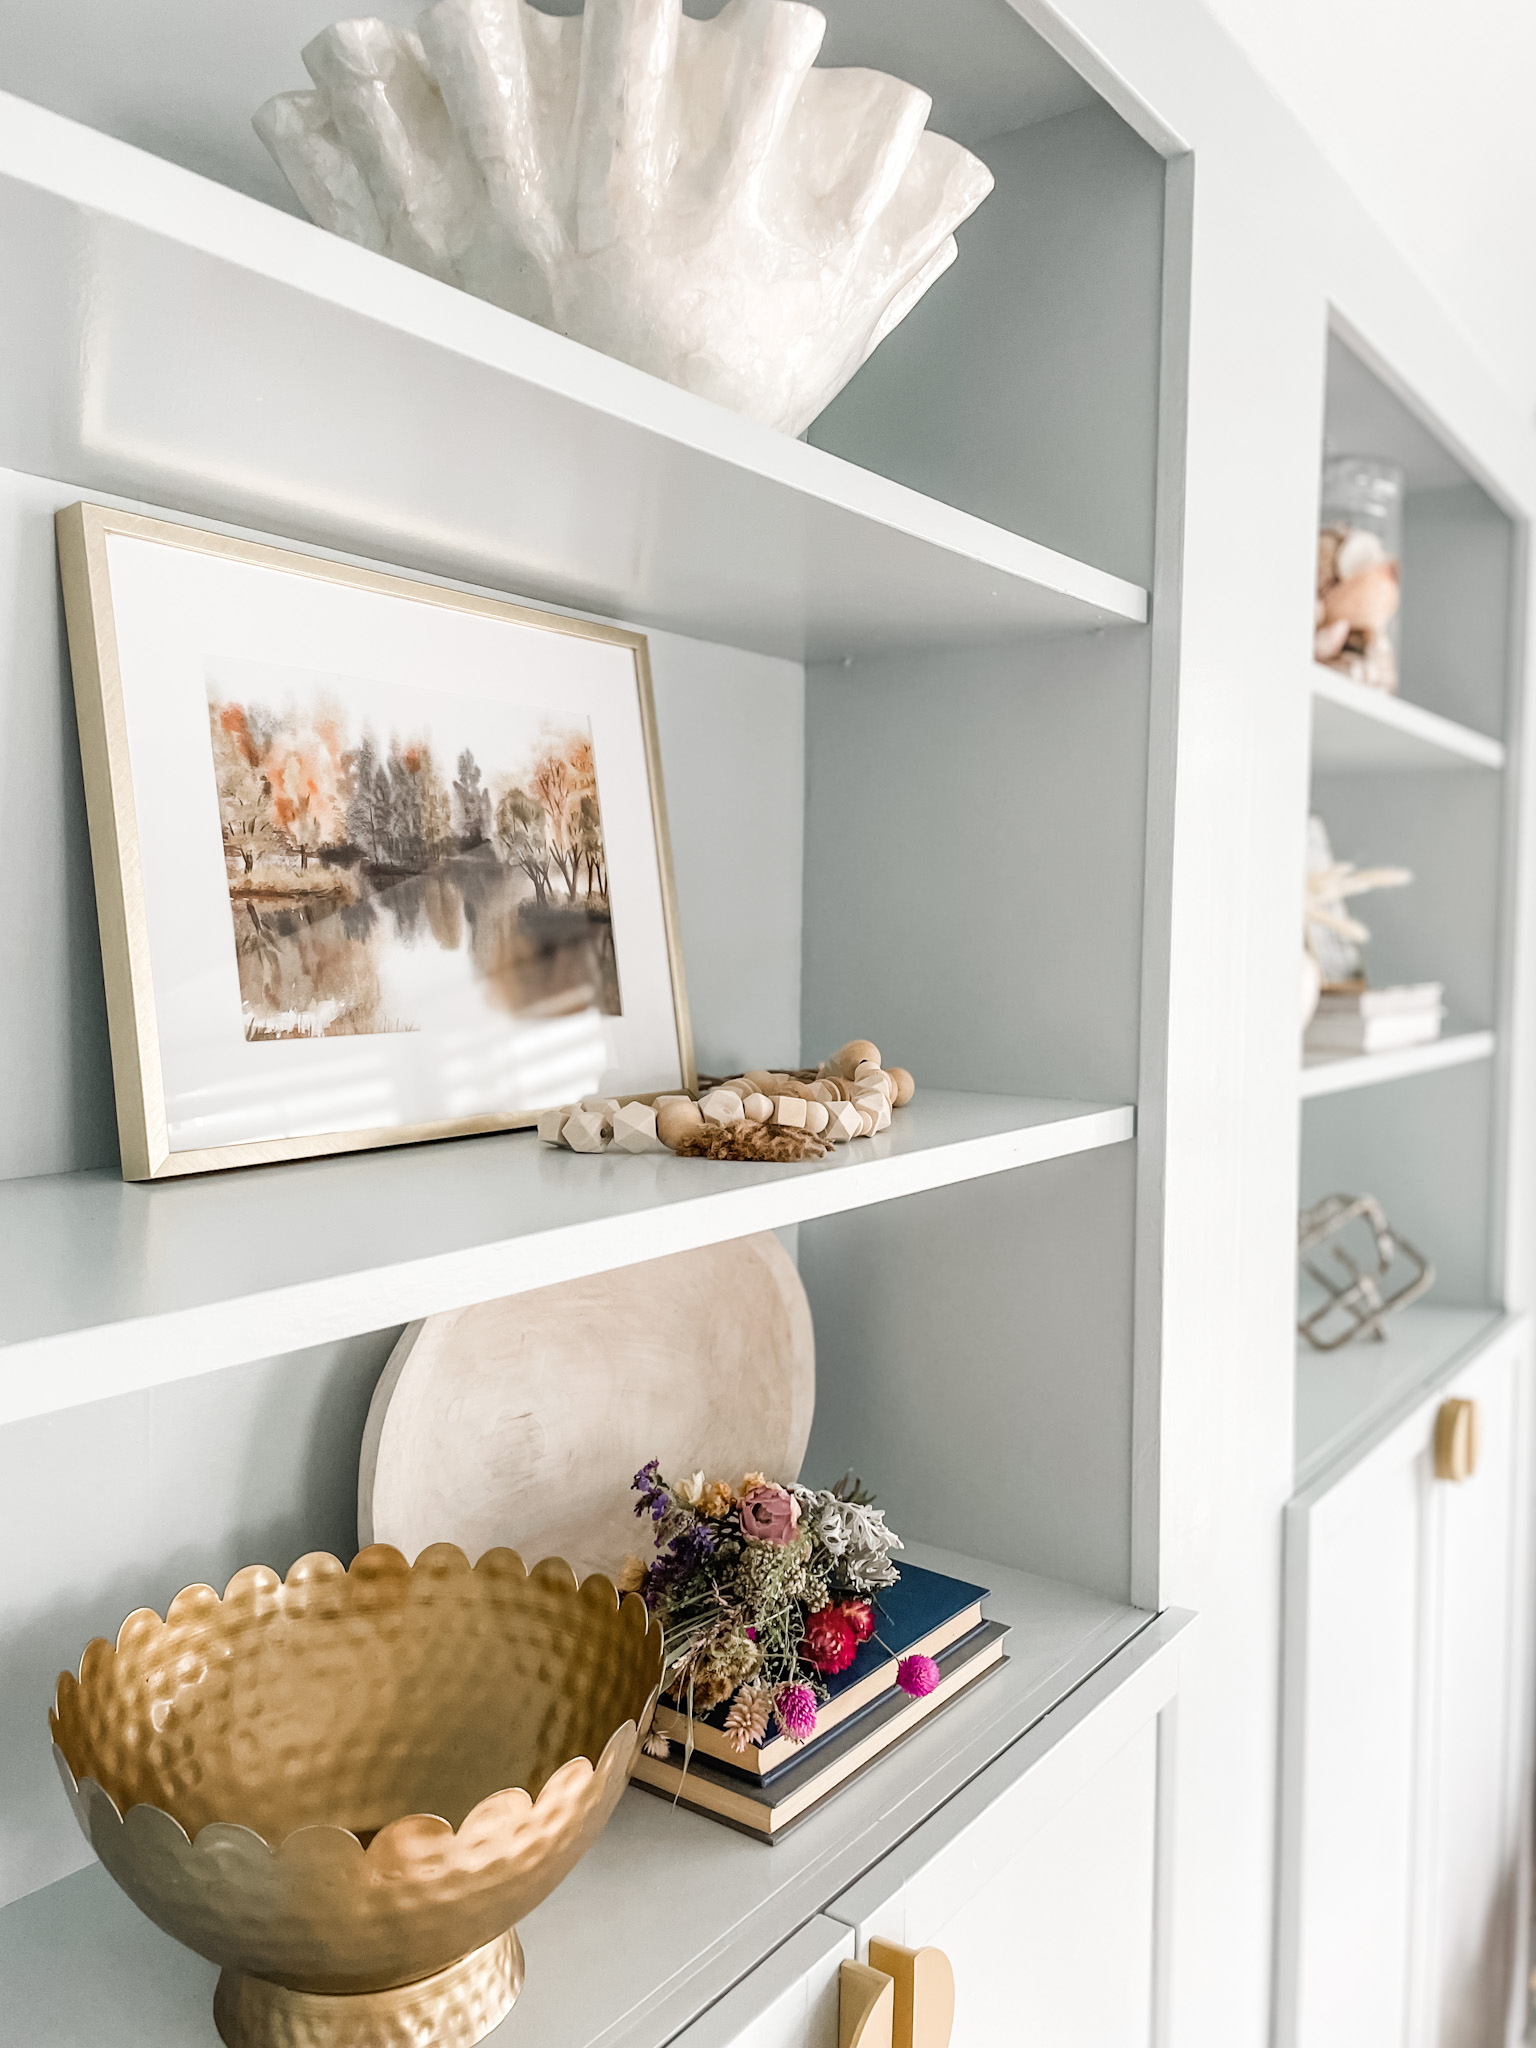 How to decorate the back of a bookcase + easy shelf liners for the